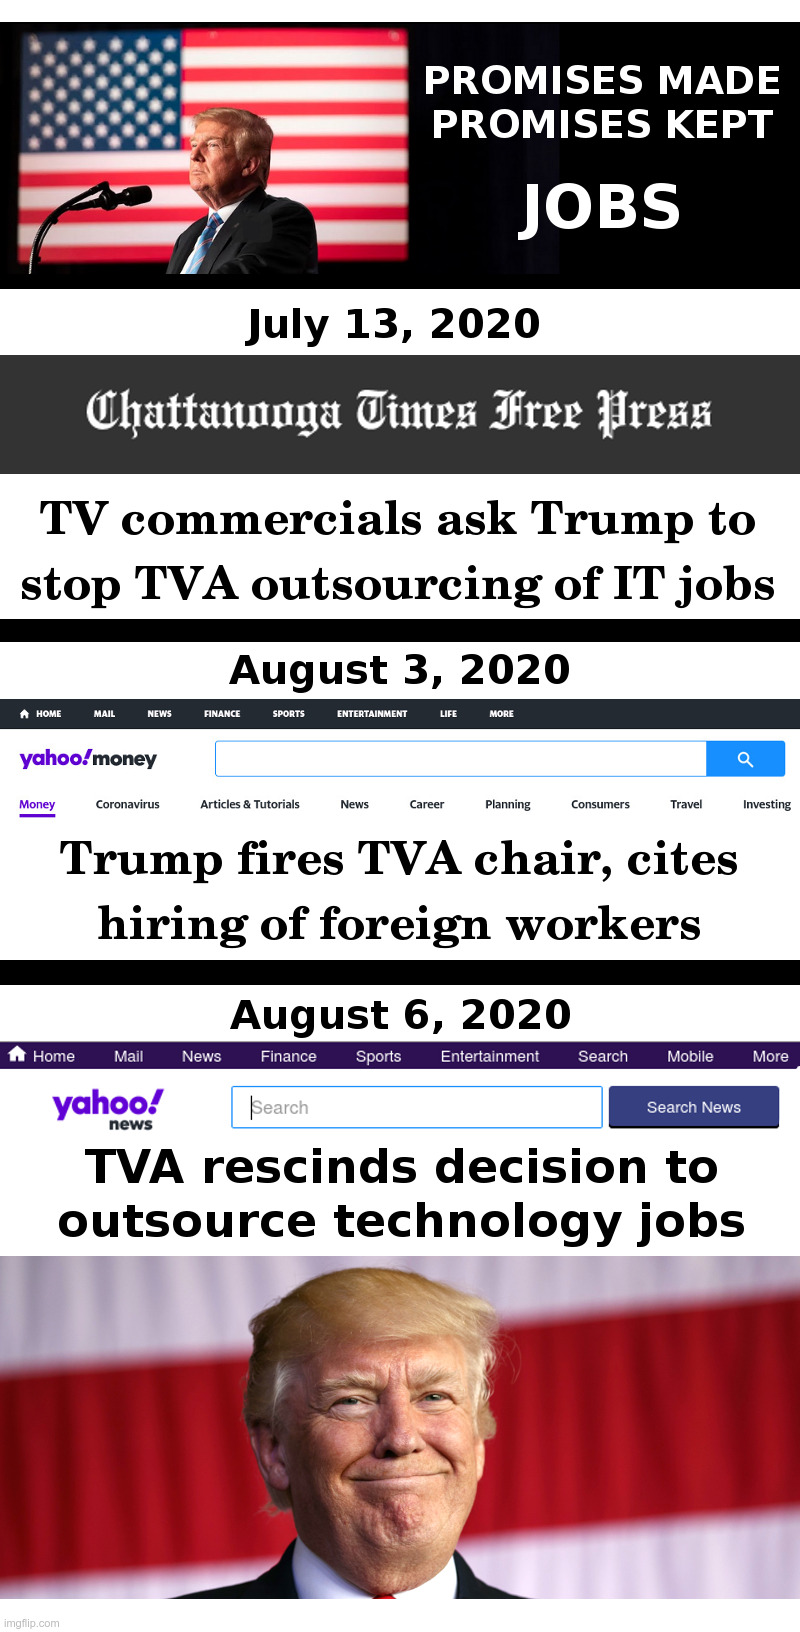 Donald Trump: Promises Made, Promises Kept | image tagged in donald trump,jobs,tennessee,tva,foreign,workers | made w/ Imgflip meme maker